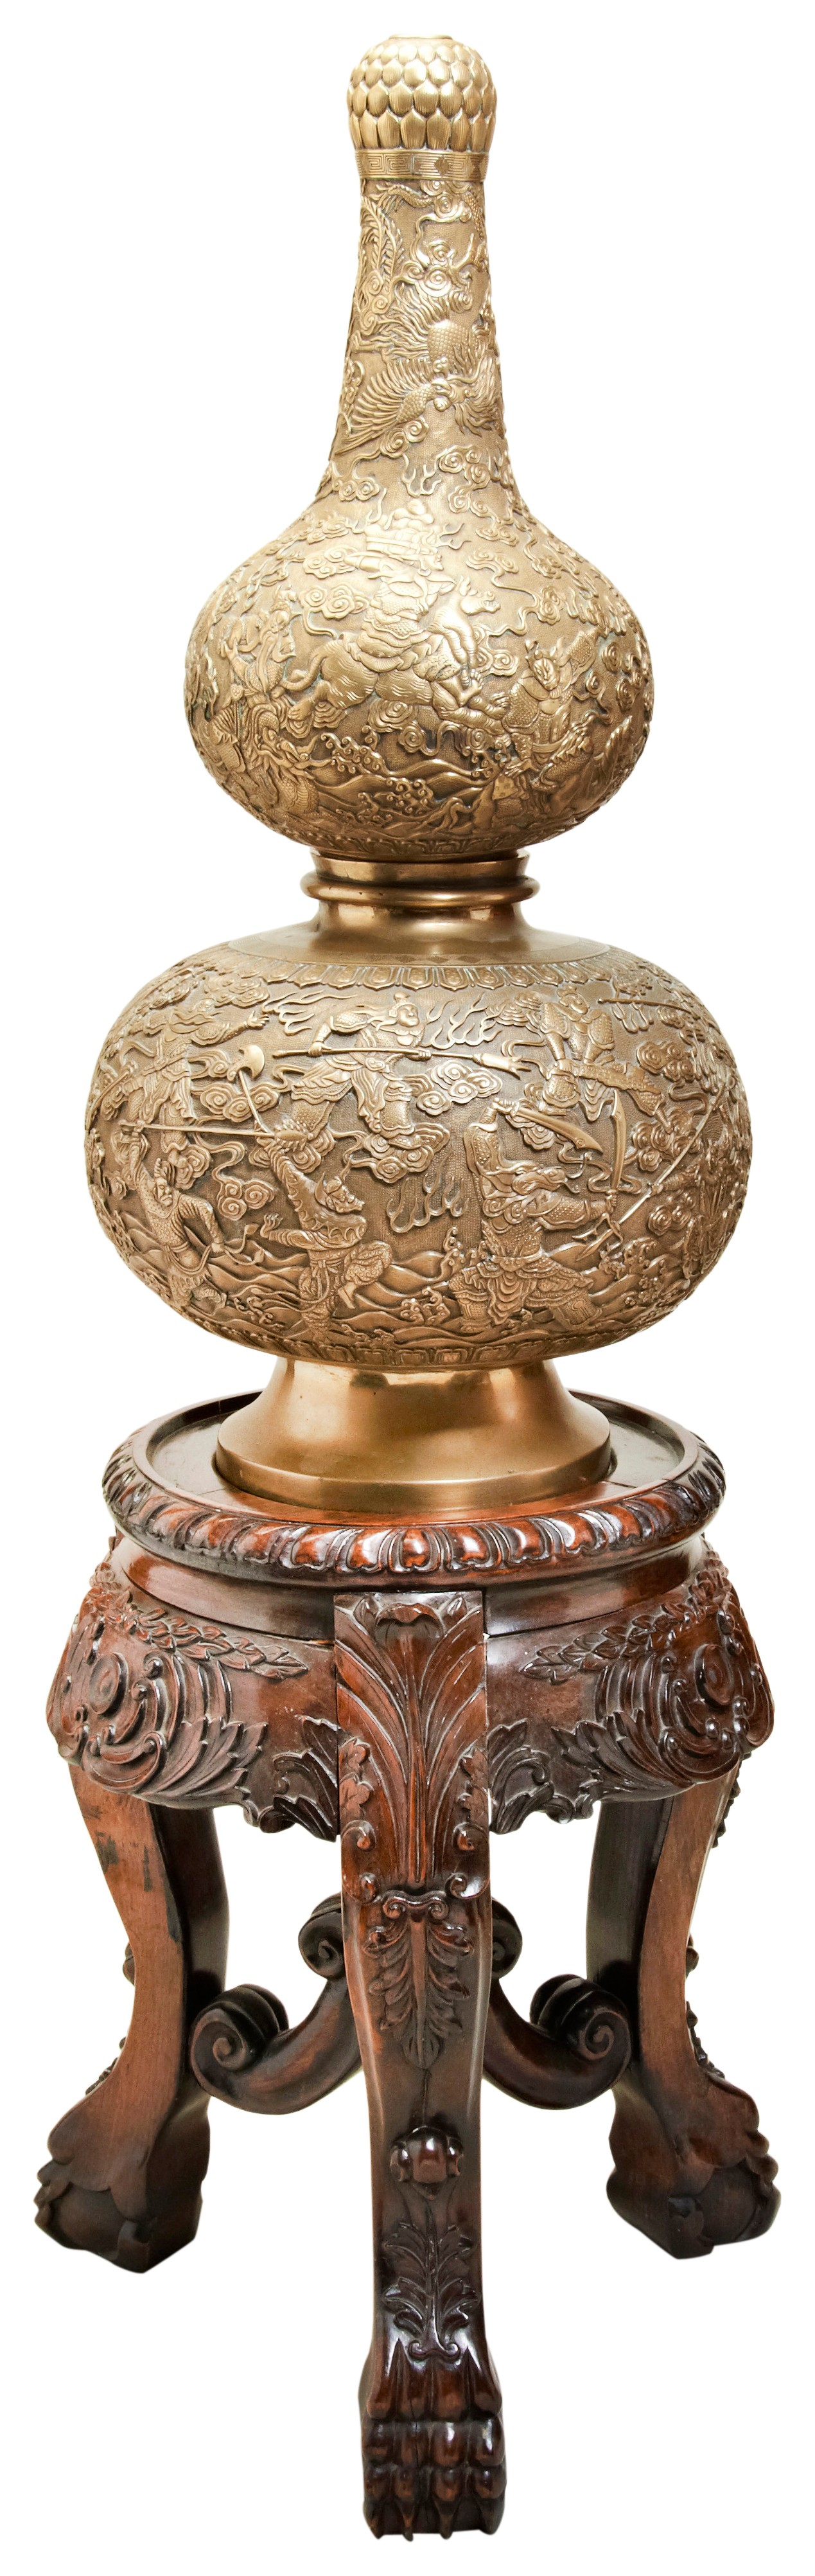 A FINE AND LARGE GILT-BRONZE DOUBLE-GOURD INCENSE BURNER  QING DYNASTY, 18TH / 19TH CENTURY 清